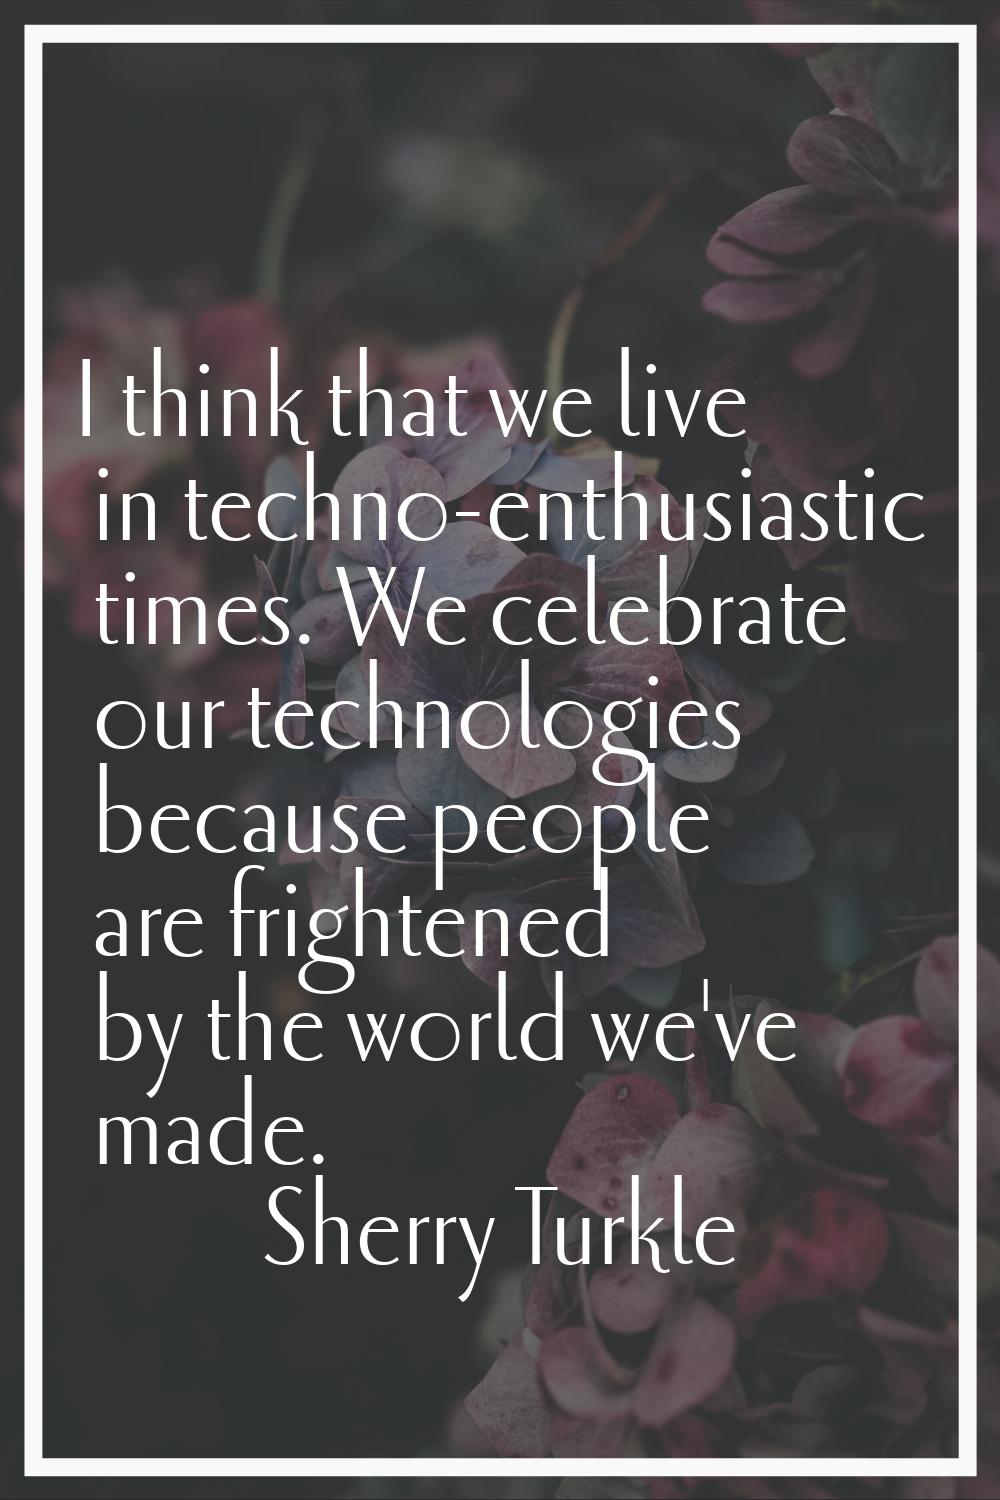 I think that we live in techno-enthusiastic times. We celebrate our technologies because people are